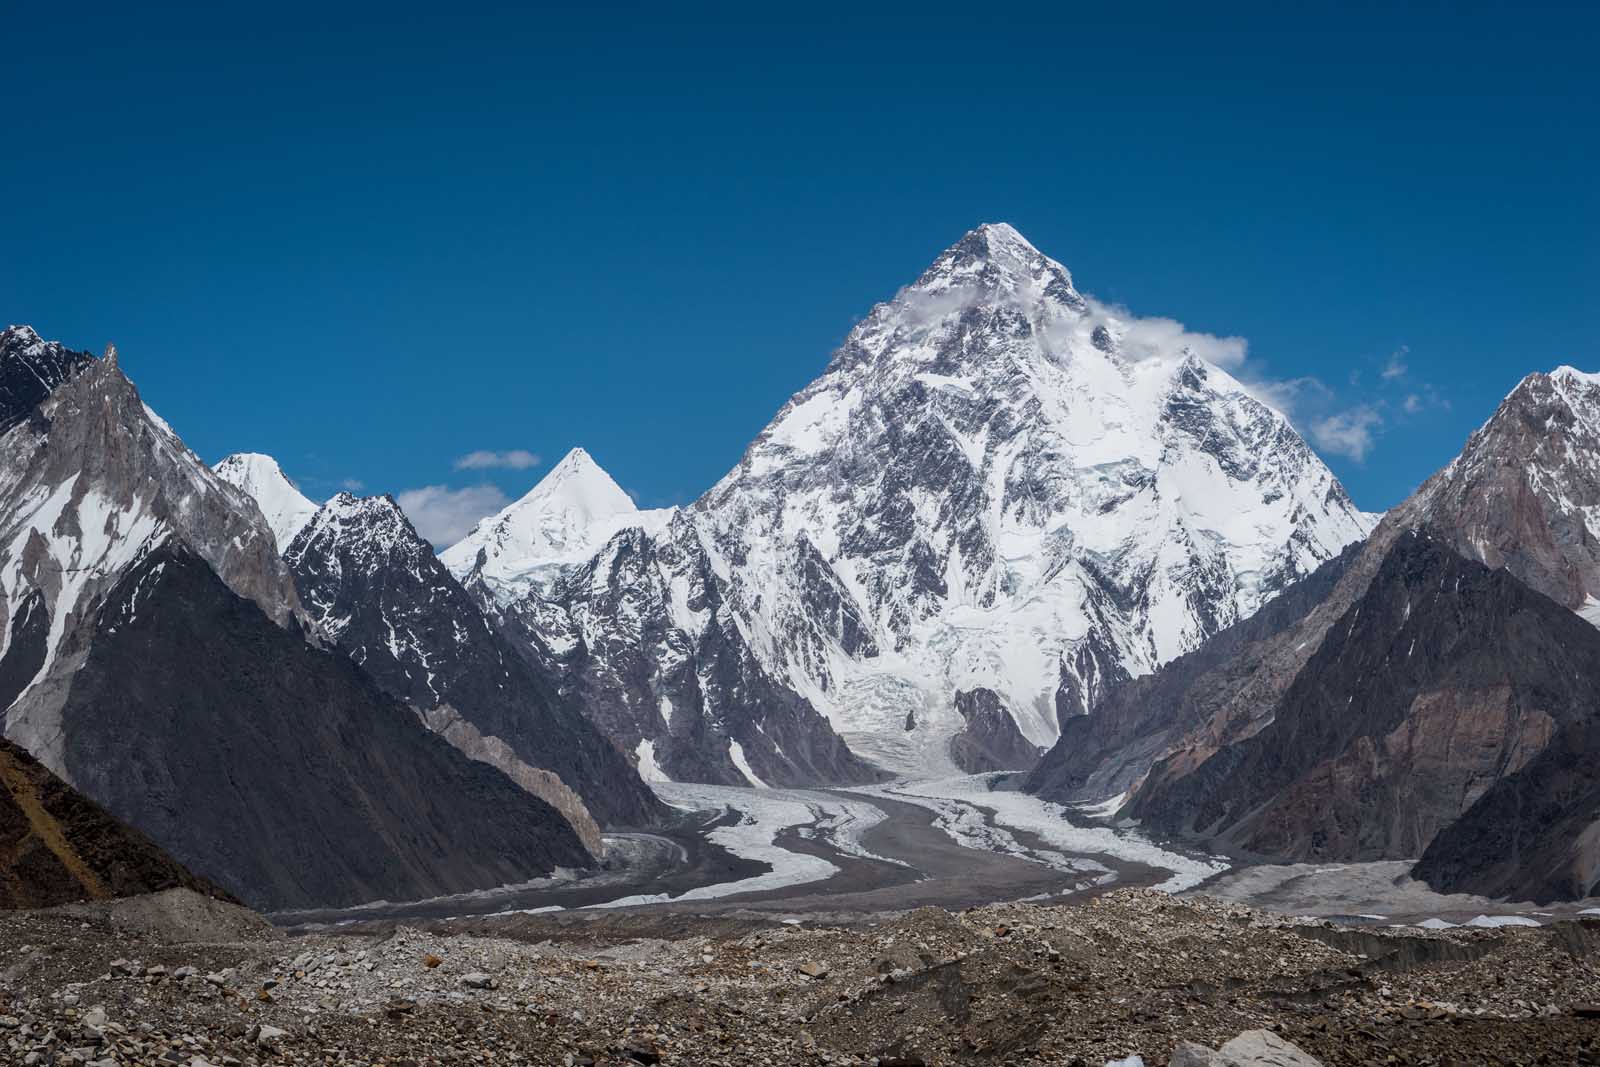 second Tallest Mountain in the World - K2